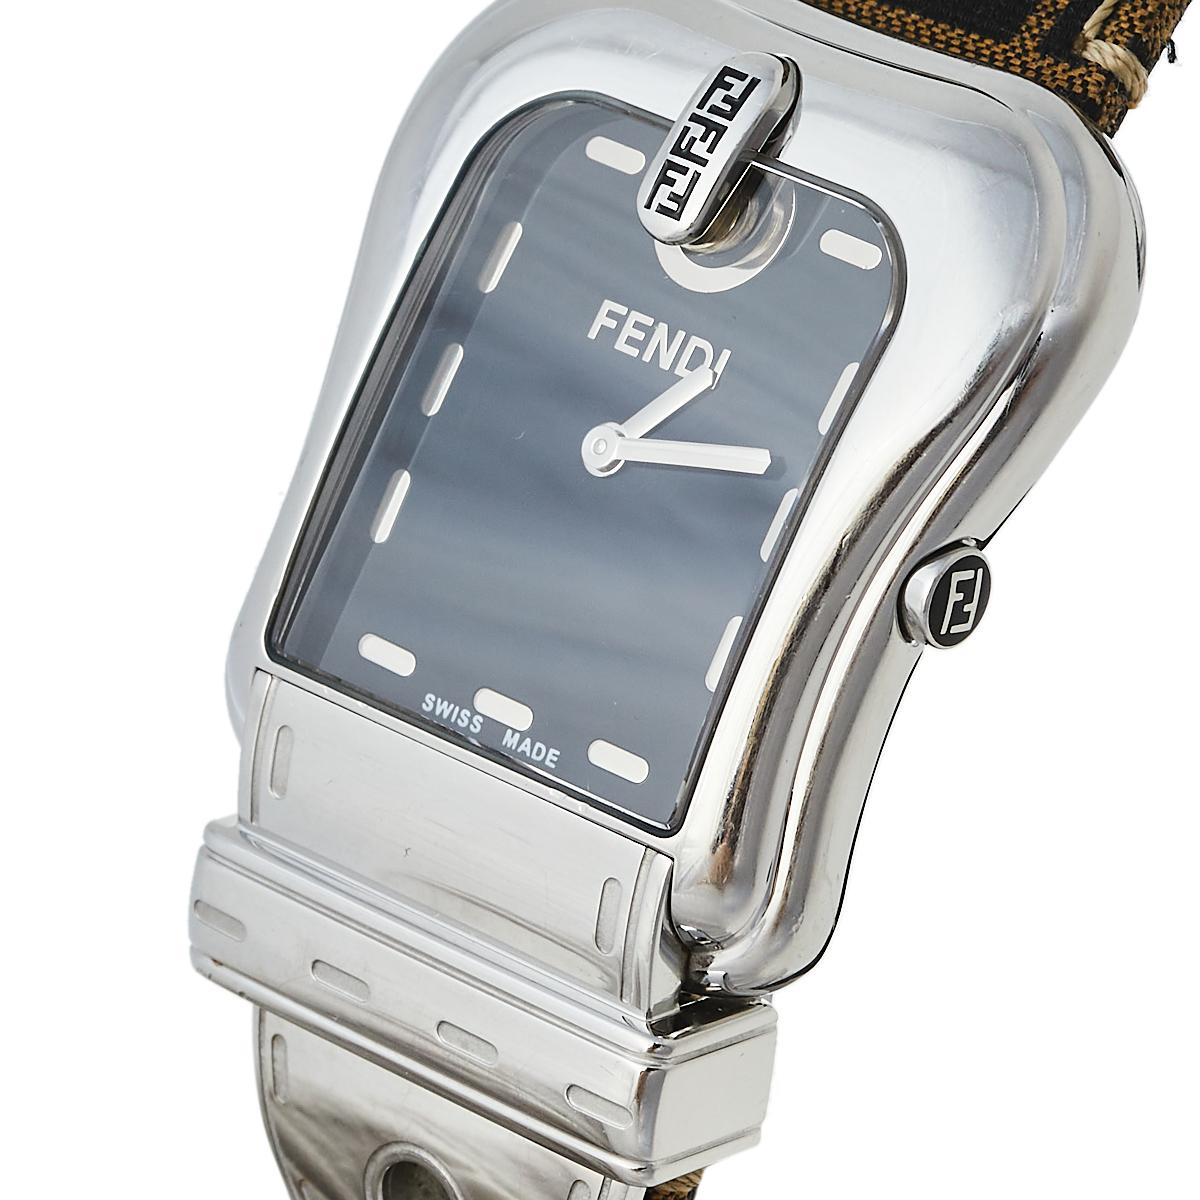 Fendi continues to carry the legacy of designing popular and innovative designs. This Fendi women’s wristwatch is designed with a durable stainless steel case shaped like a buckle. It has a black dial with unique-looking hour markers and two hands.